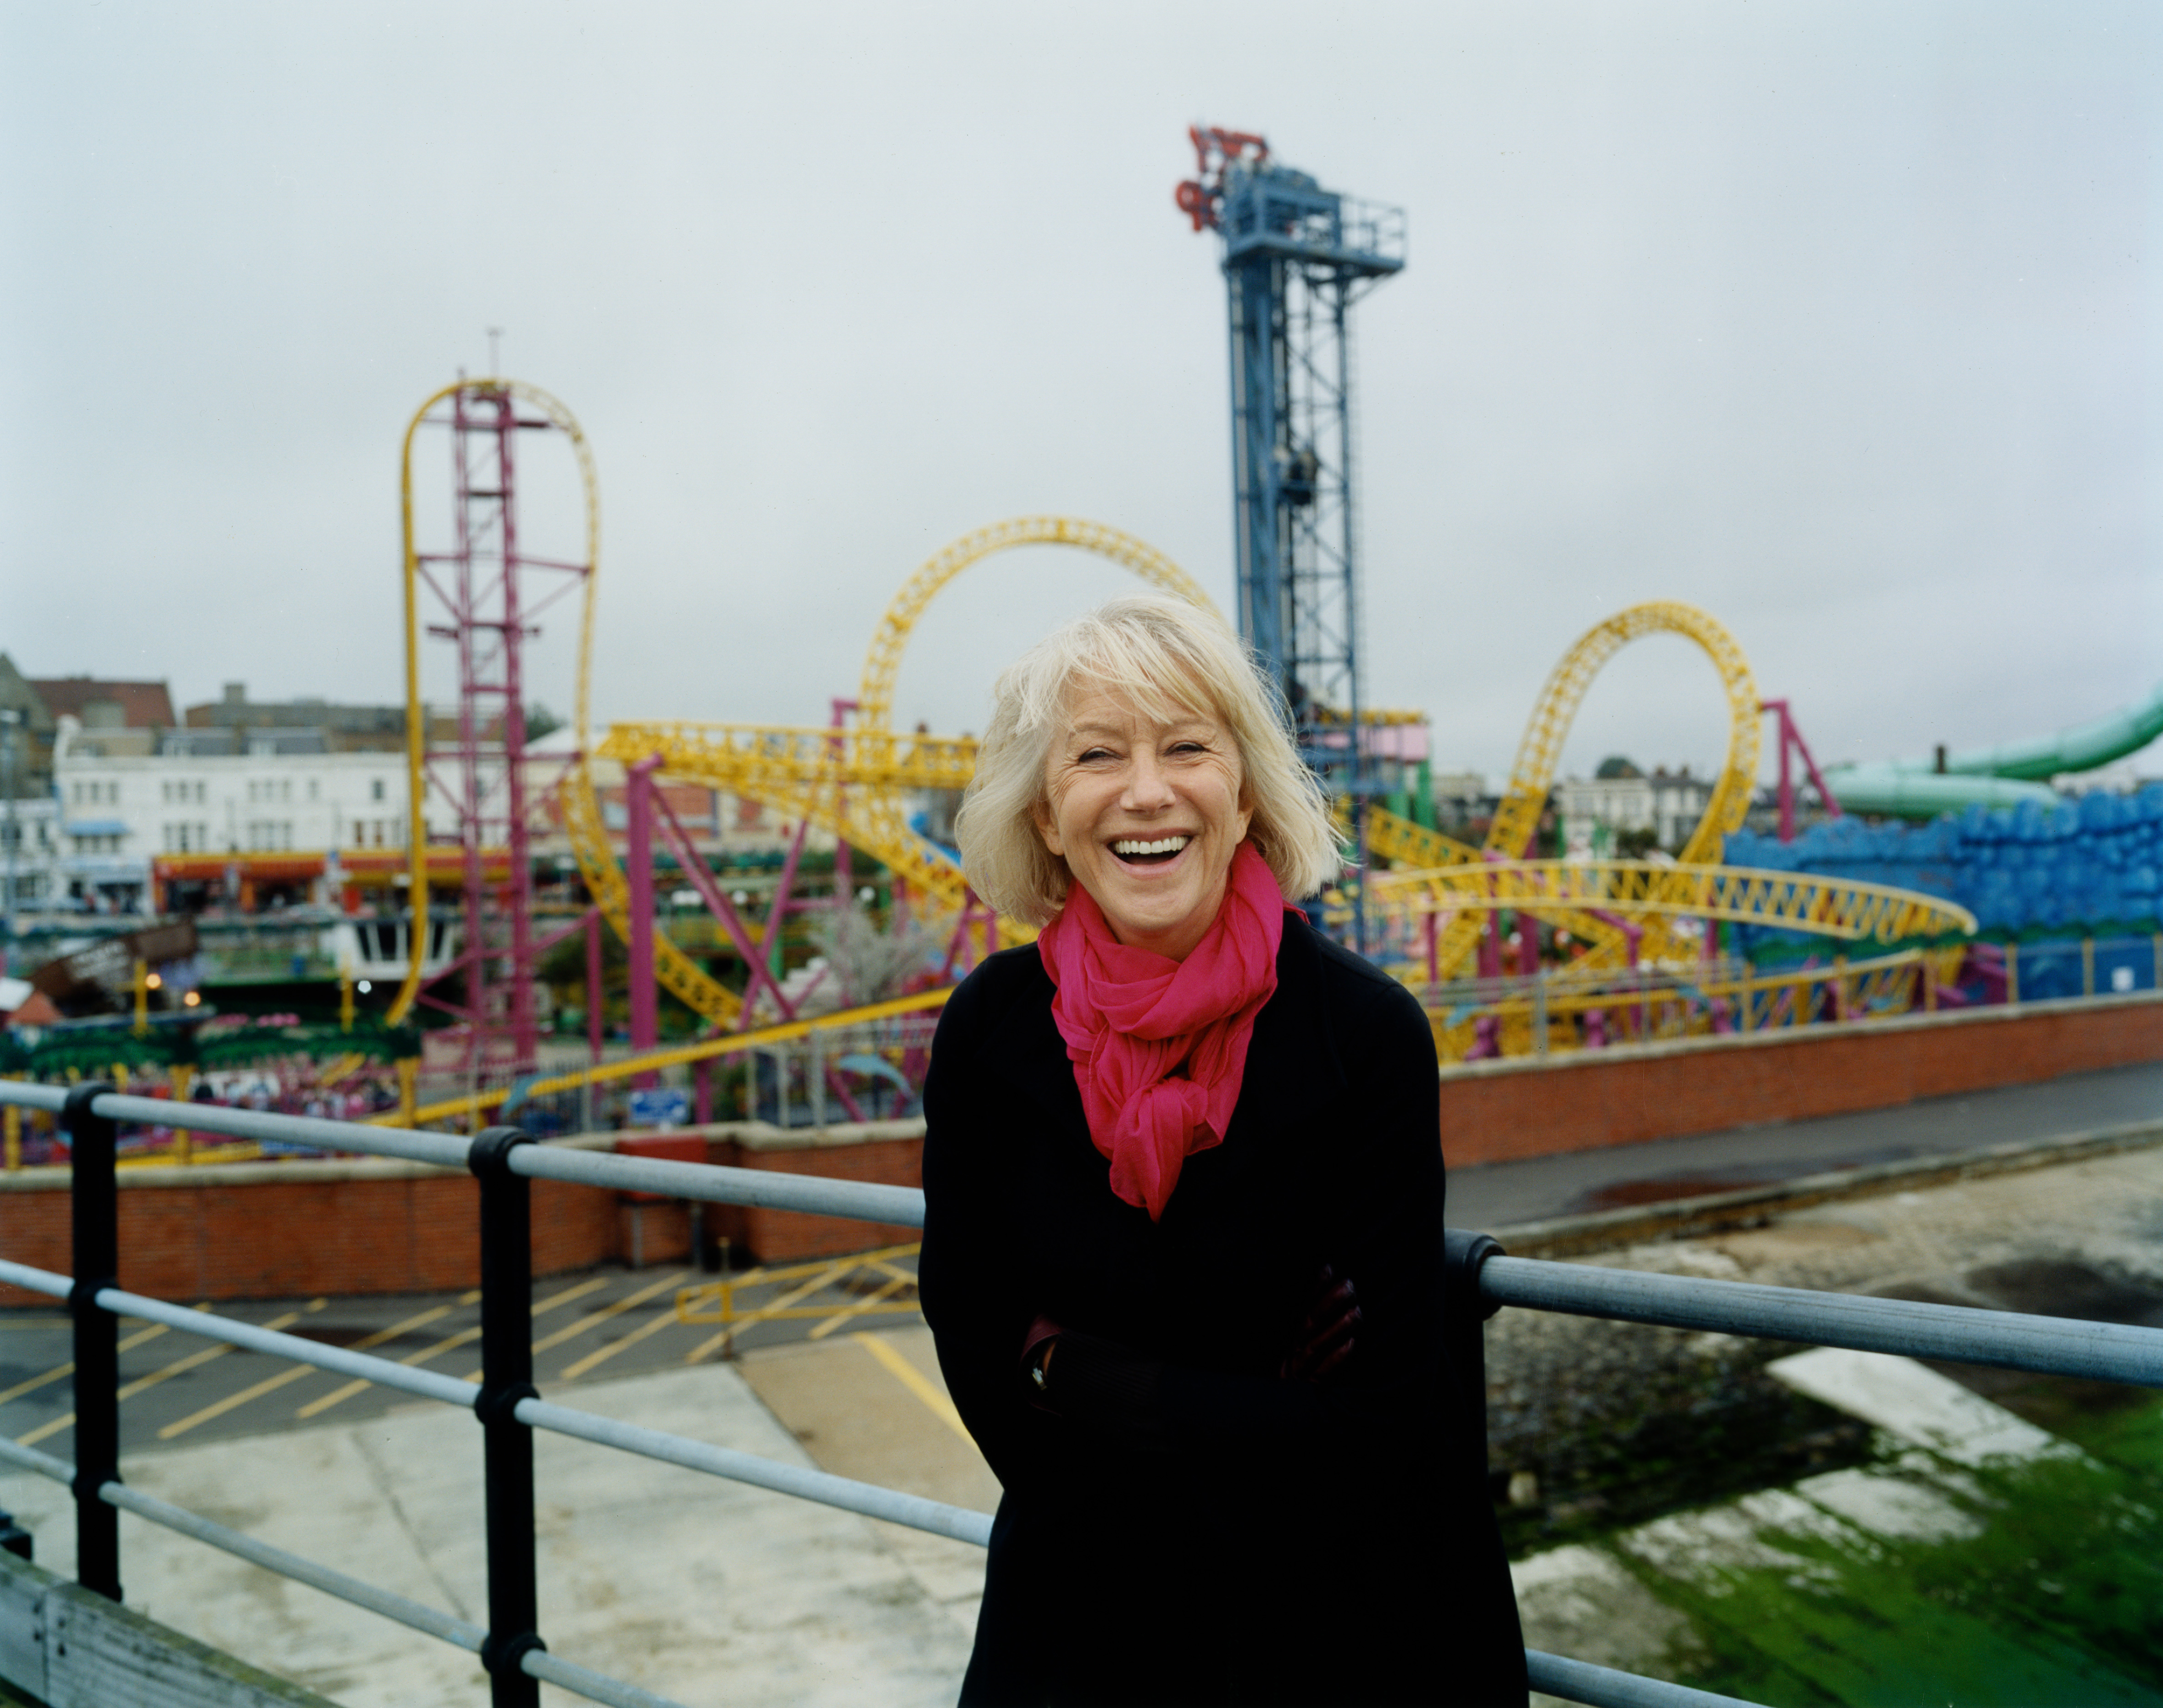 Helen Mirren poses by a pier, circa 2005. | Source: Getty Images